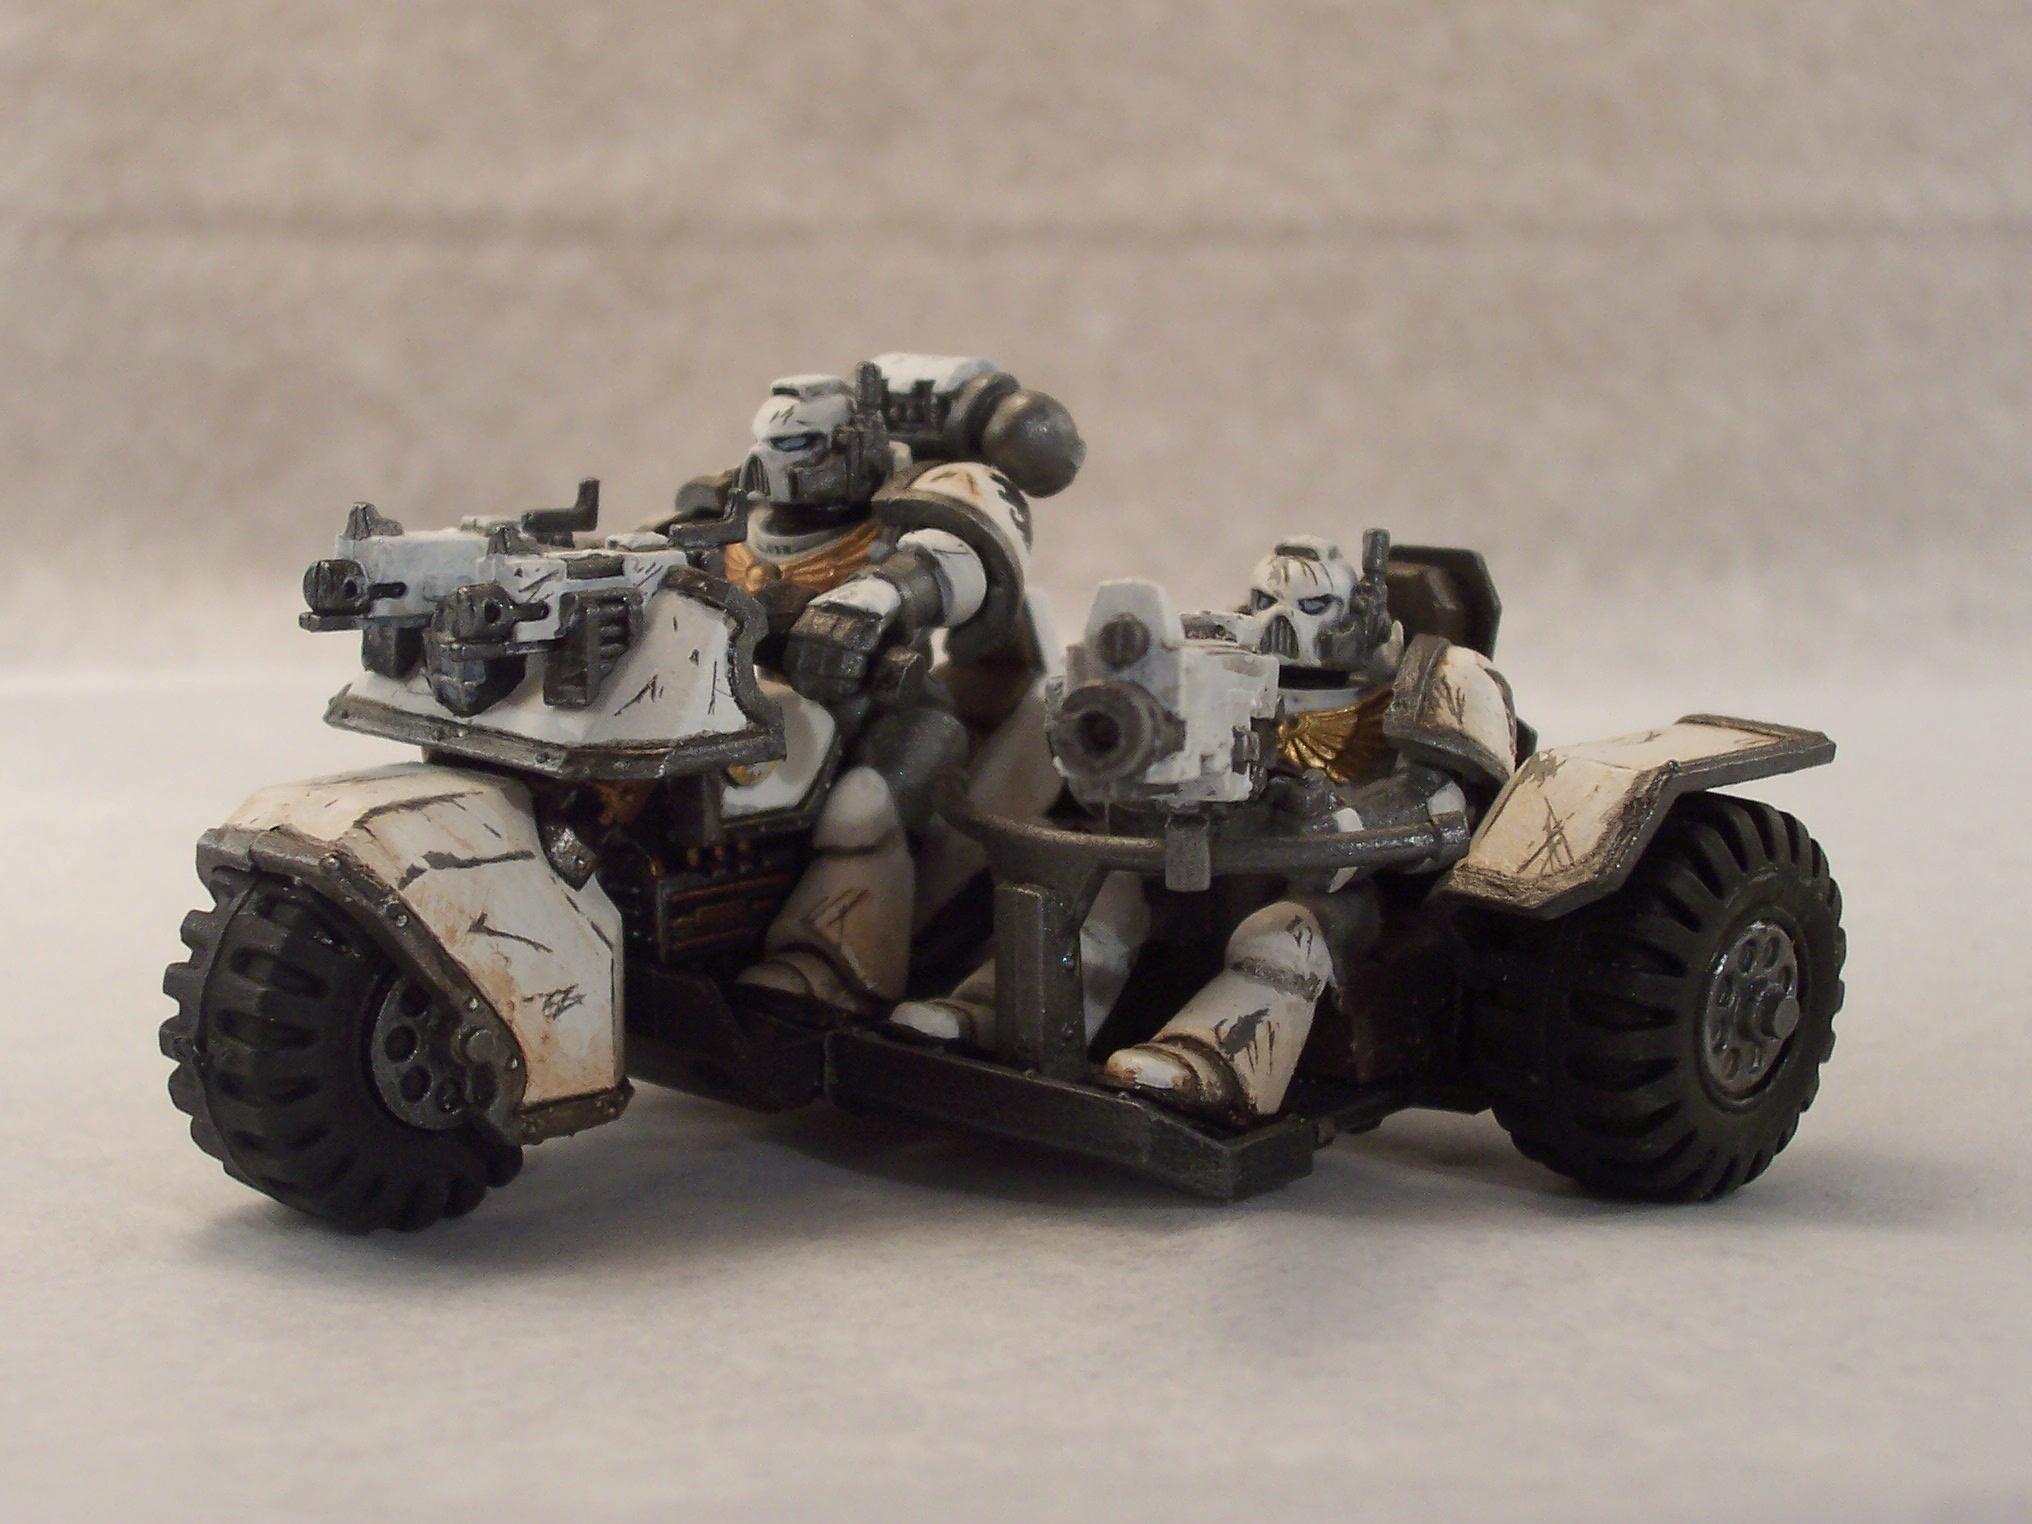 Attack Bike, Bike, Celestial Lions, Heavy Bolter, Sidecar, Space Marines, Warhammer 40,000, Weathered